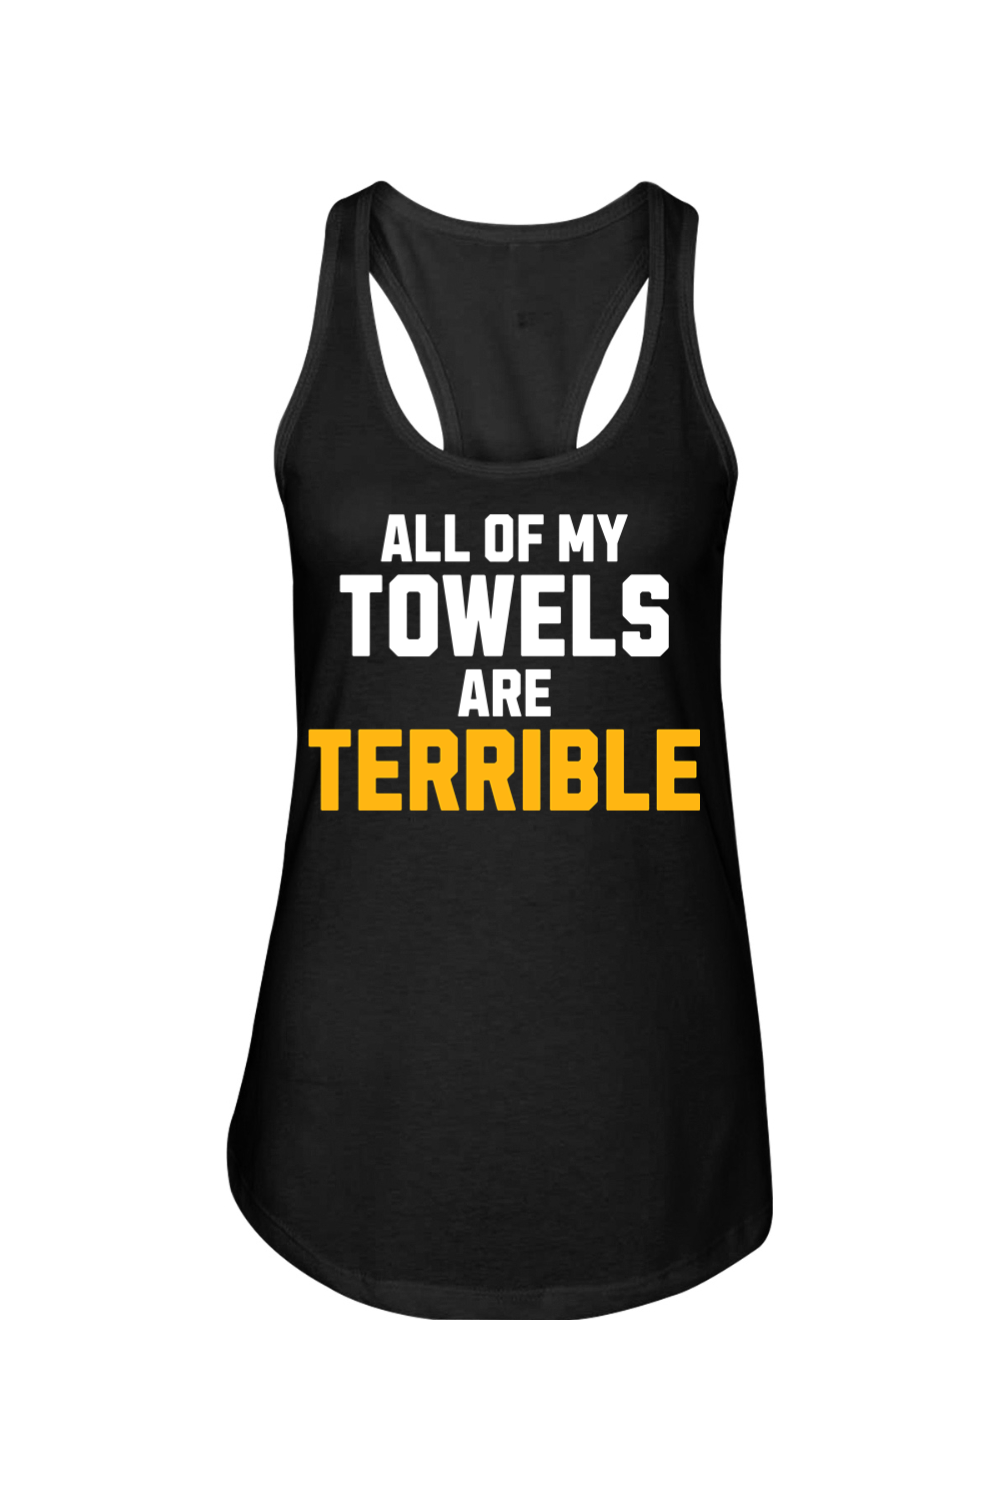 All of My Towels are Terrible - Ladies Racerback Tank - Yinzylvania